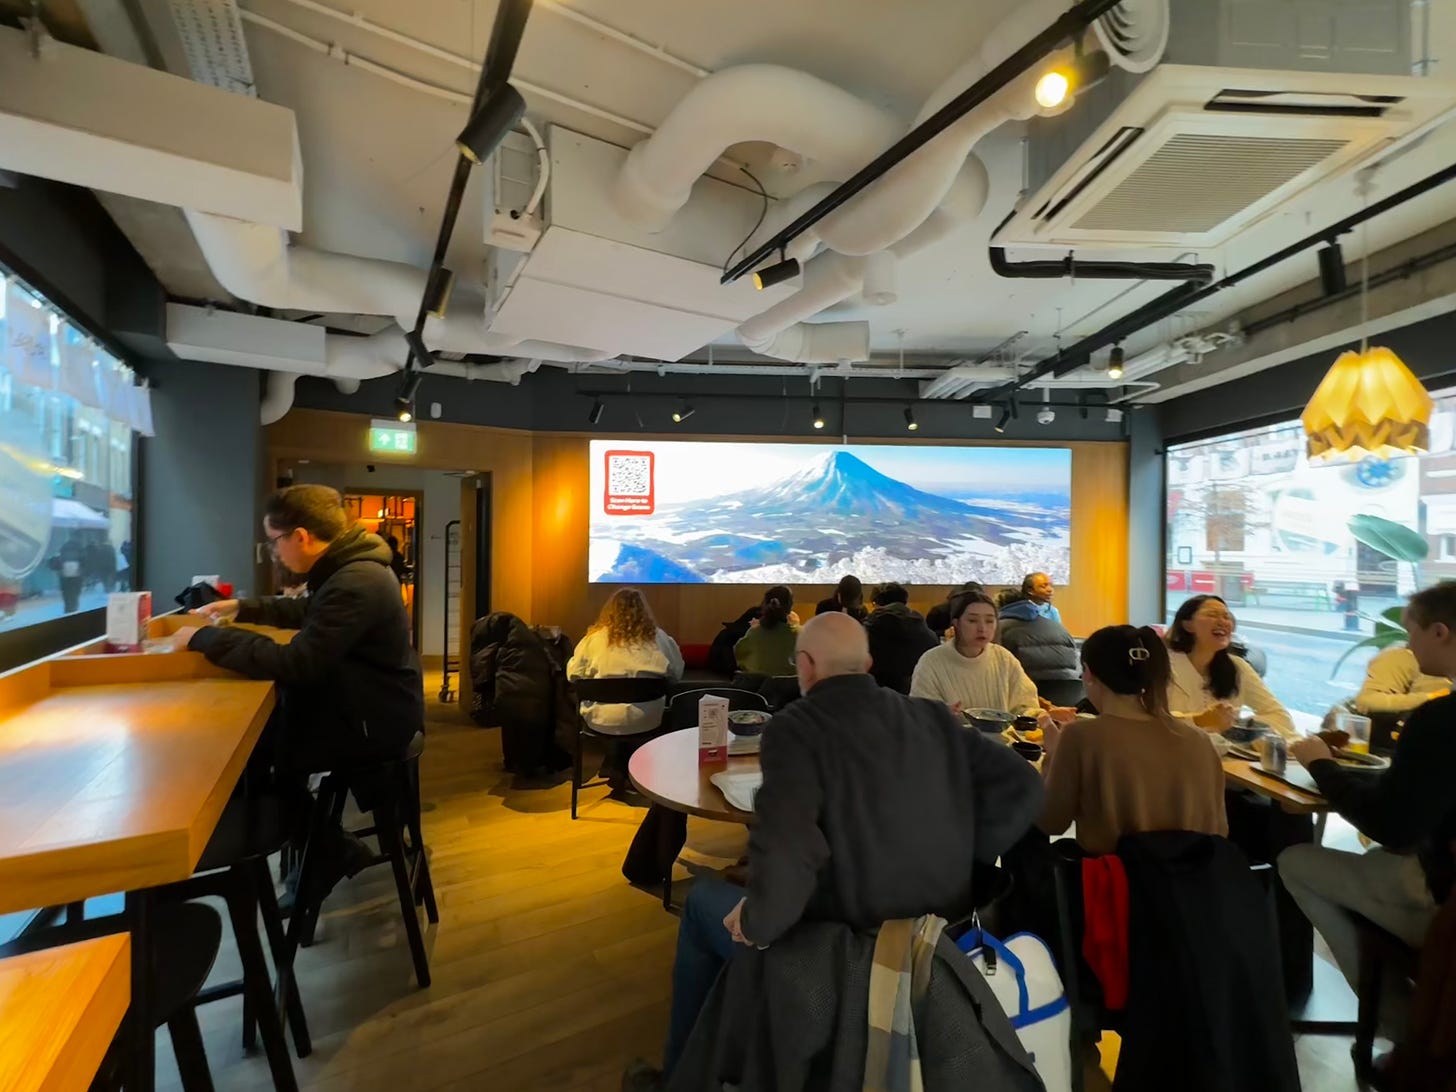 A restaurant with a big widescreen view of Mount Fuji on a wall